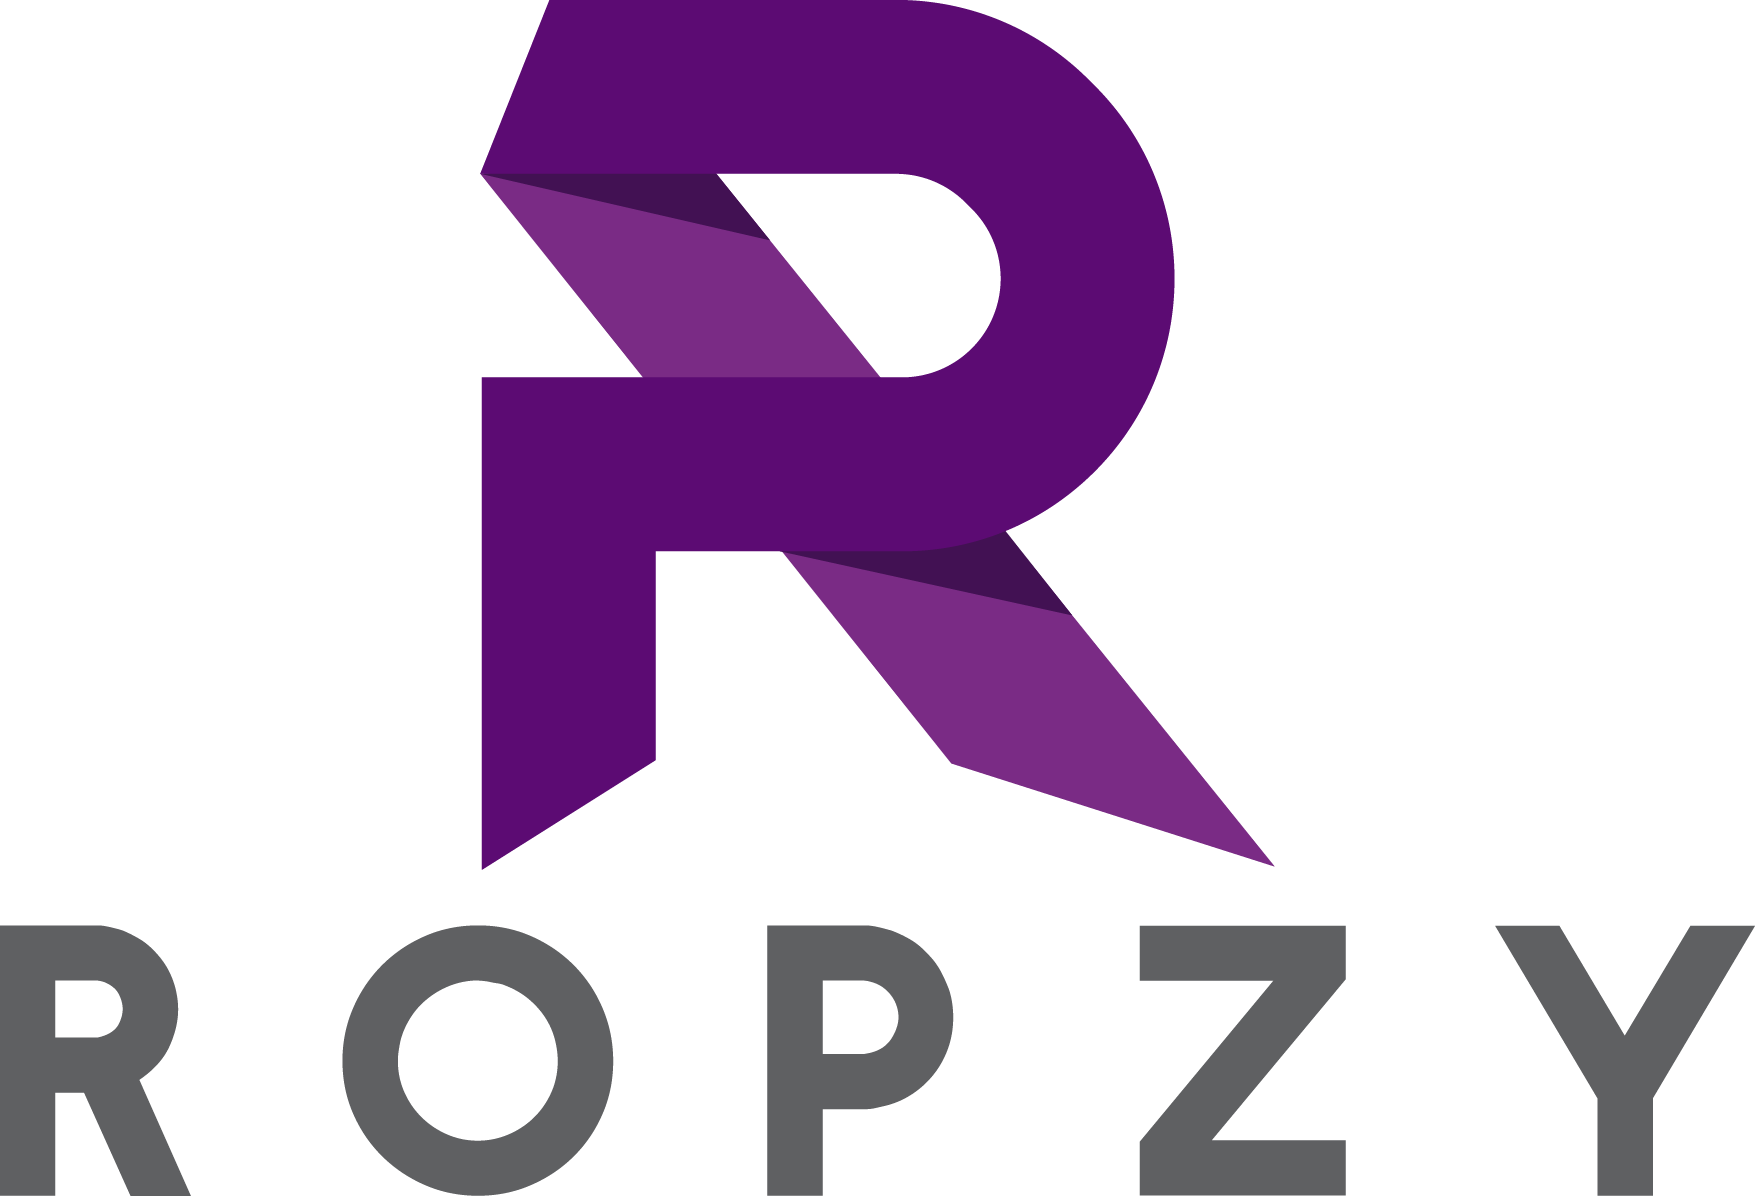 ropzy.com is for sale